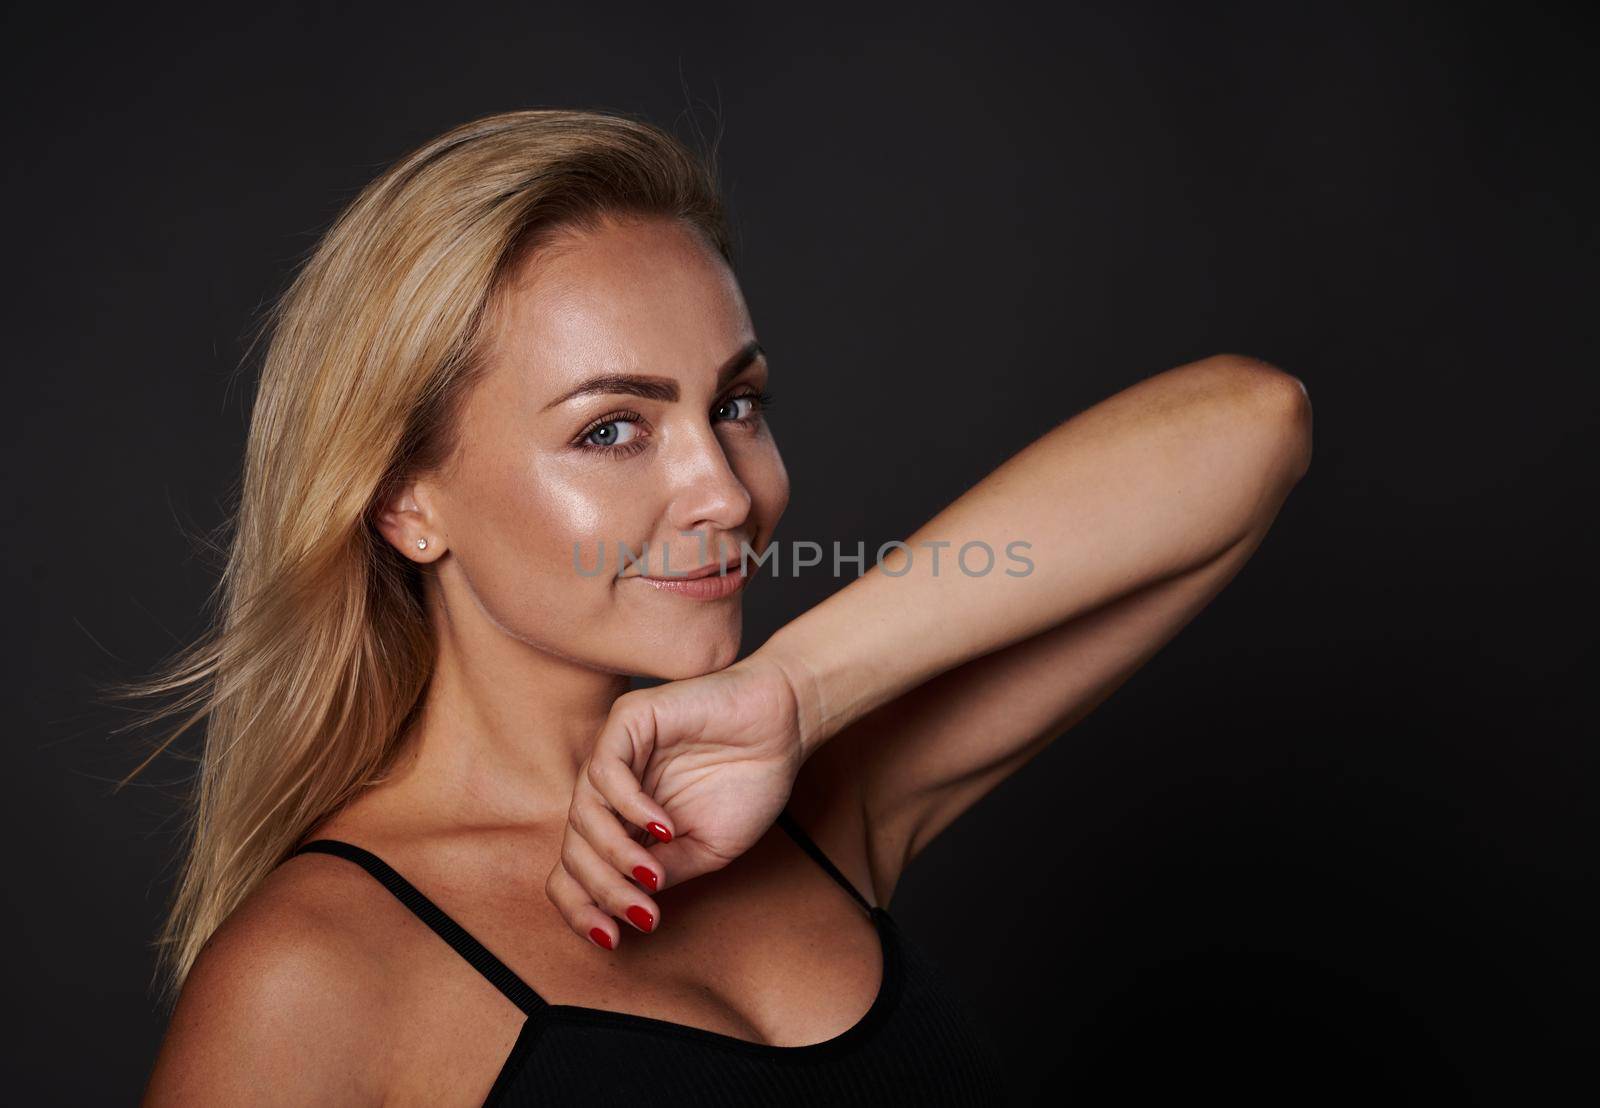 Headshot attractive beautiful woman with shining glowing fresh tanned skin, in underwear cutely smiling looking at camera isolated over black background, copy space. Self acceptance, Body positivity